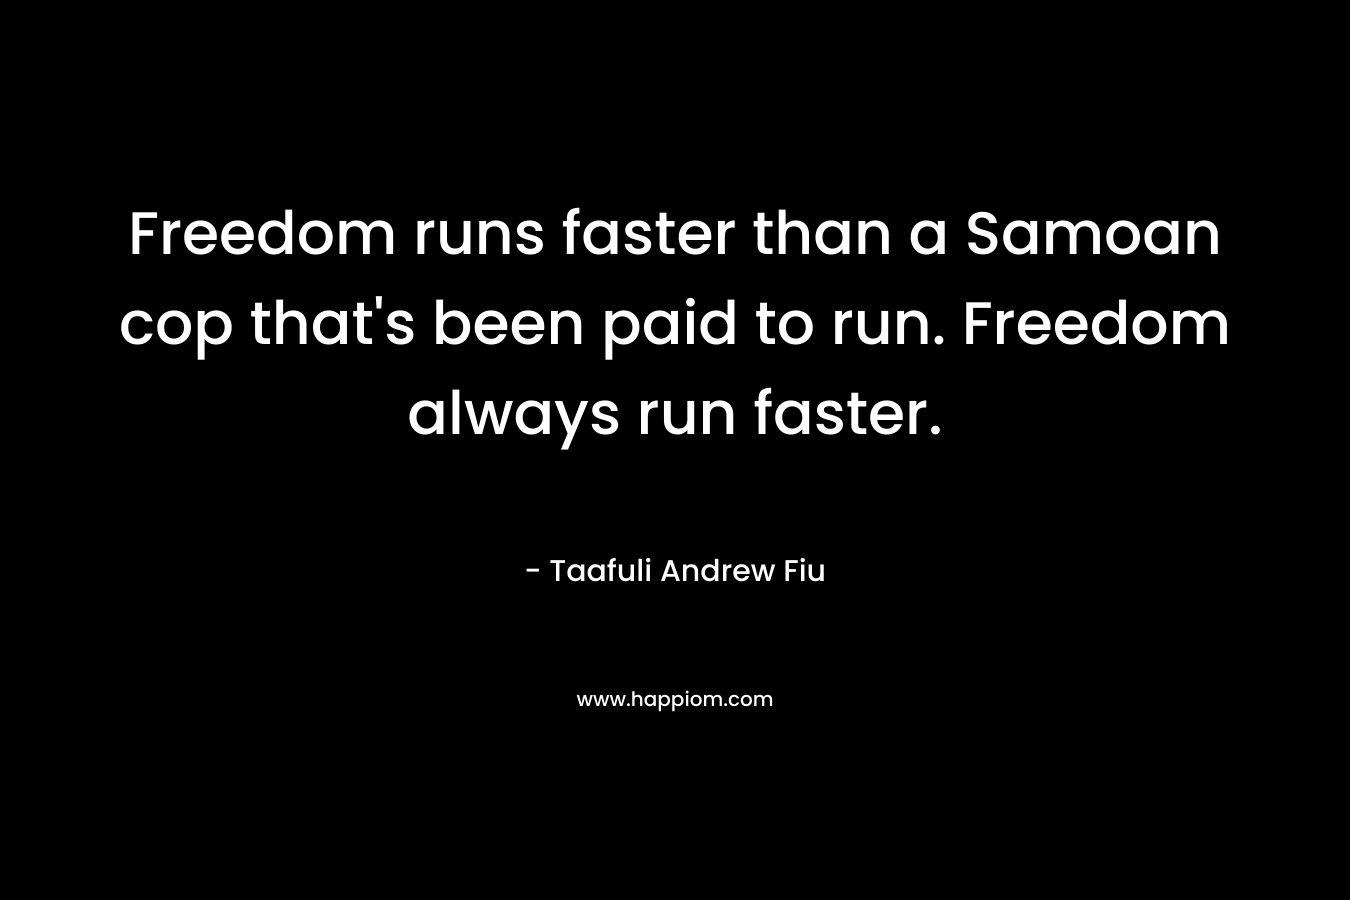 Freedom runs faster than a Samoan cop that's been paid to run. Freedom always run faster.